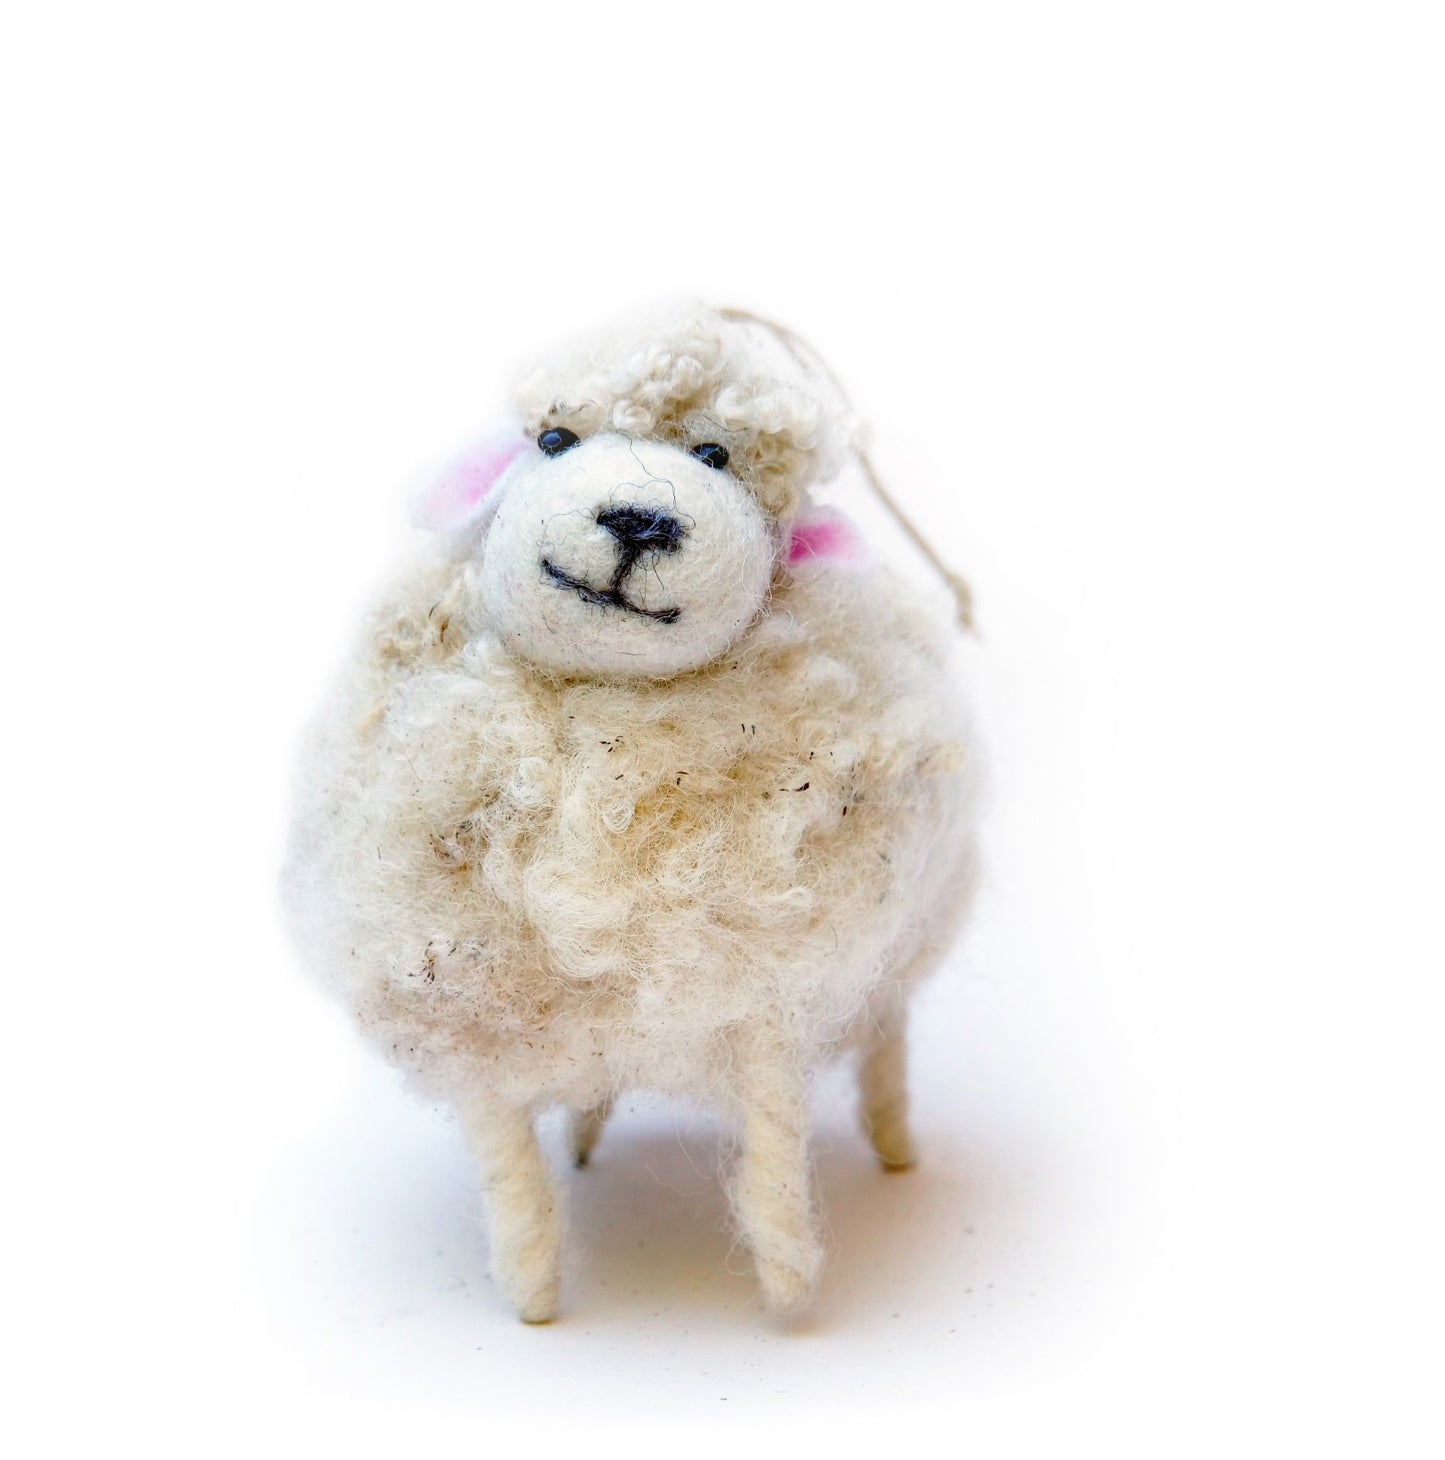 Felted wool white sheep ornament handmade in Canada by Tuckamoor Wildcrafts.